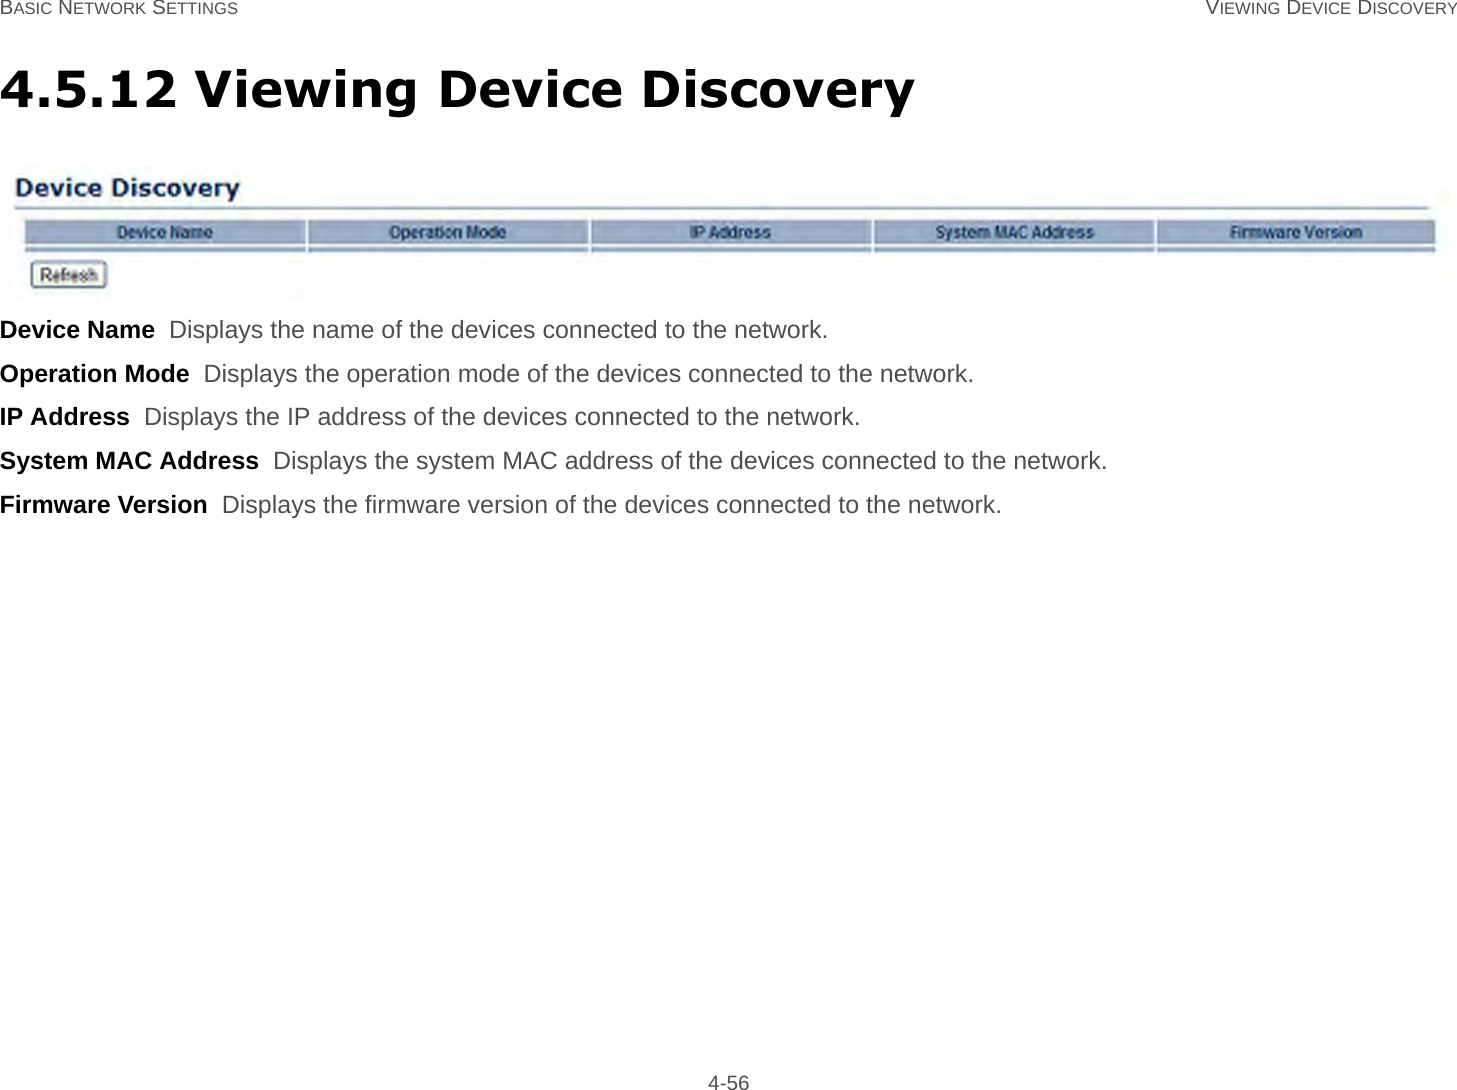 BASIC NETWORK SETTINGS VIEWING DEVICE DISCOVERY 4-564.5.12 Viewing Device DiscoveryDevice Name  Displays the name of the devices connected to the network.Operation Mode  Displays the operation mode of the devices connected to the network.IP Address  Displays the IP address of the devices connected to the network.System MAC Address  Displays the system MAC address of the devices connected to the network.Firmware Version  Displays the firmware version of the devices connected to the network.